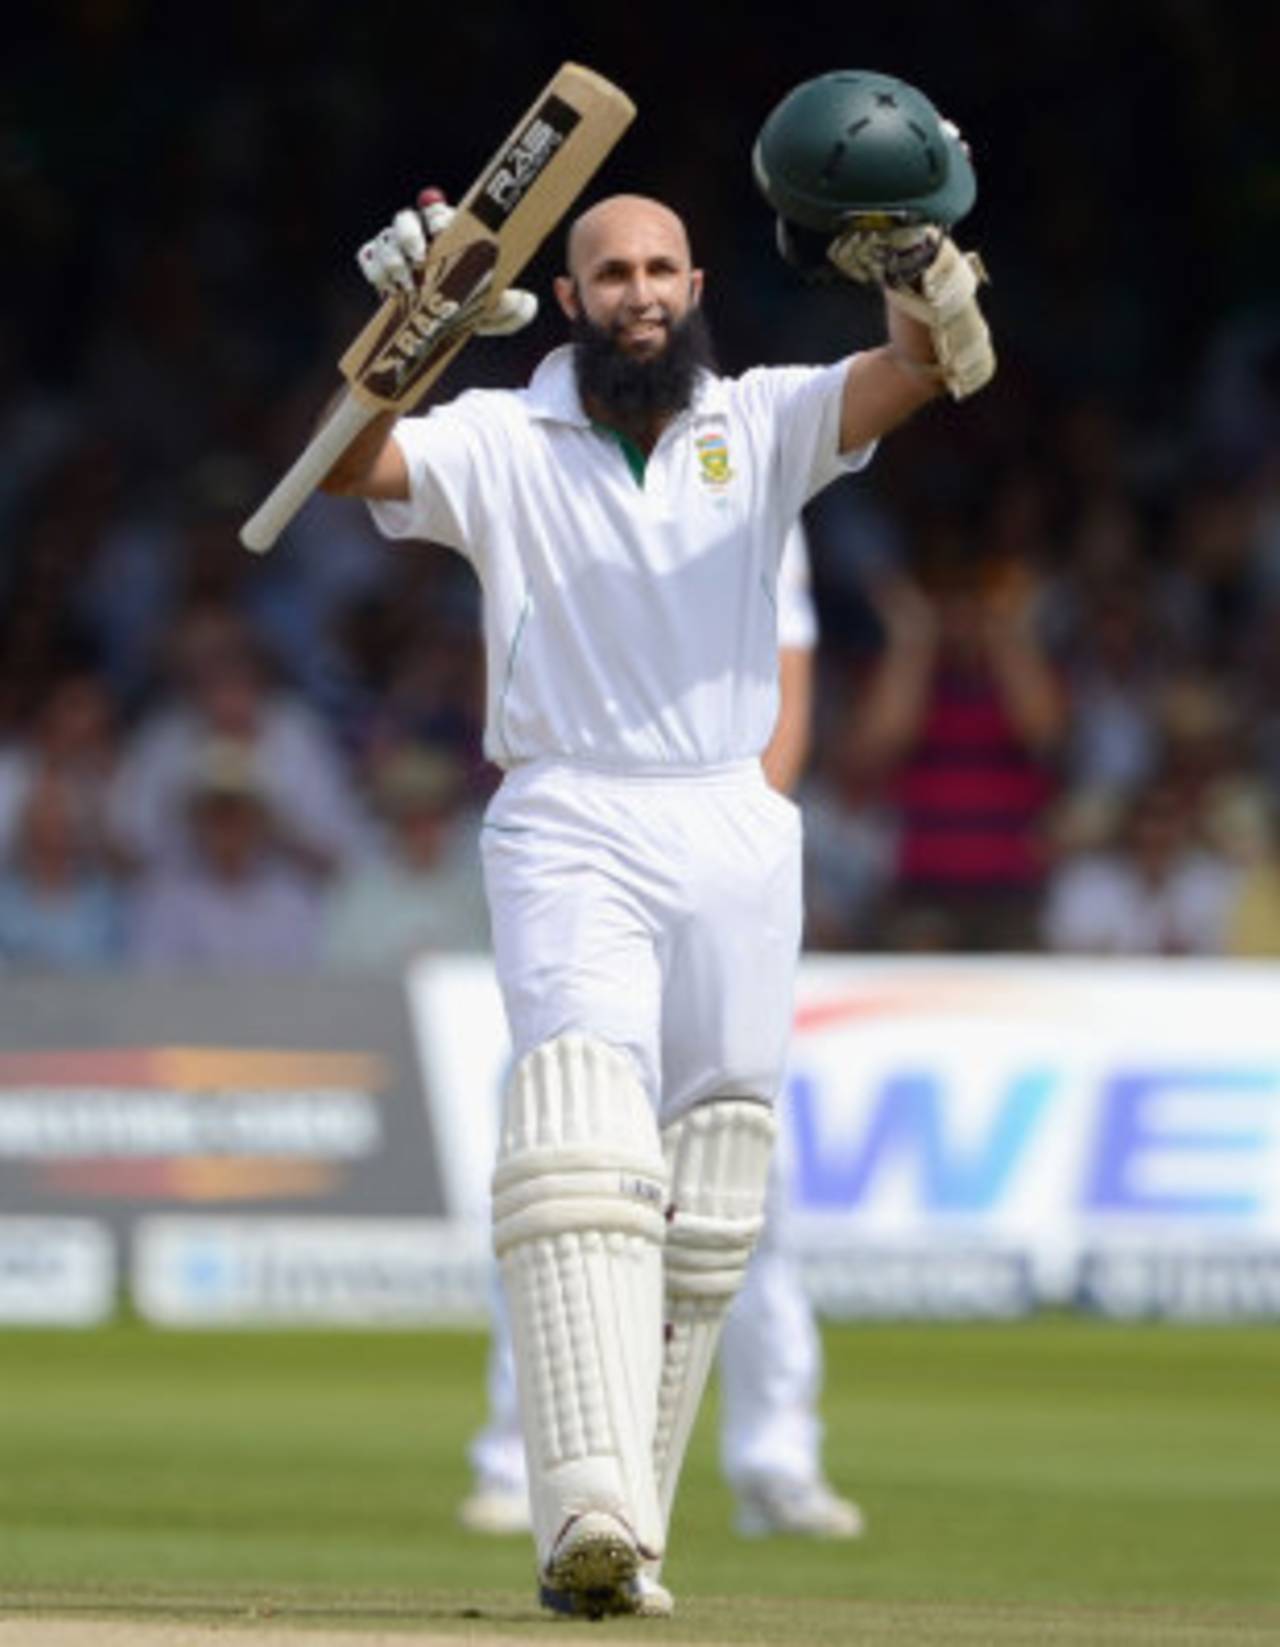 Hashim Amla reached his second hundred of the tour, England v South Africa, 3rd Investec Test, Lord's, 4th day, August 19, 2012